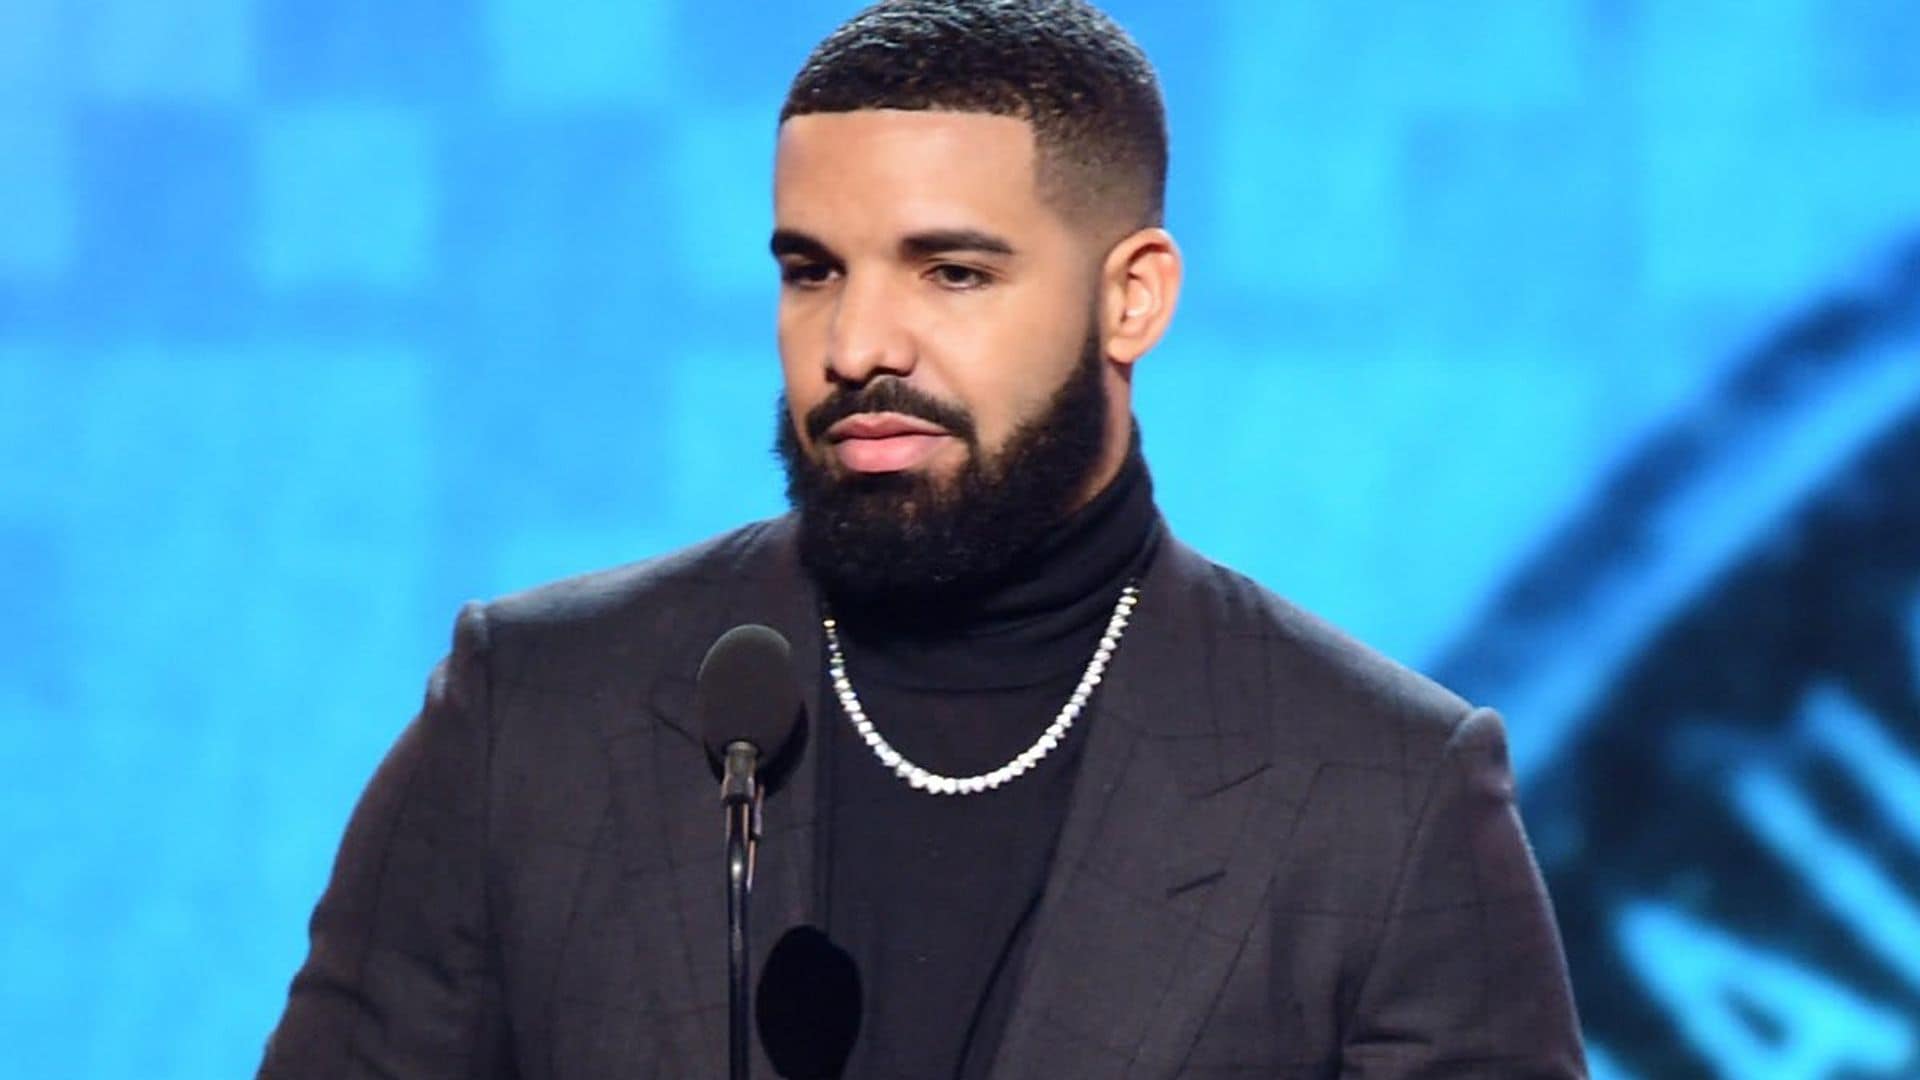 Drake breaks silence after performing at Travis Scott’s Astroworld: ‘My heart is broken’